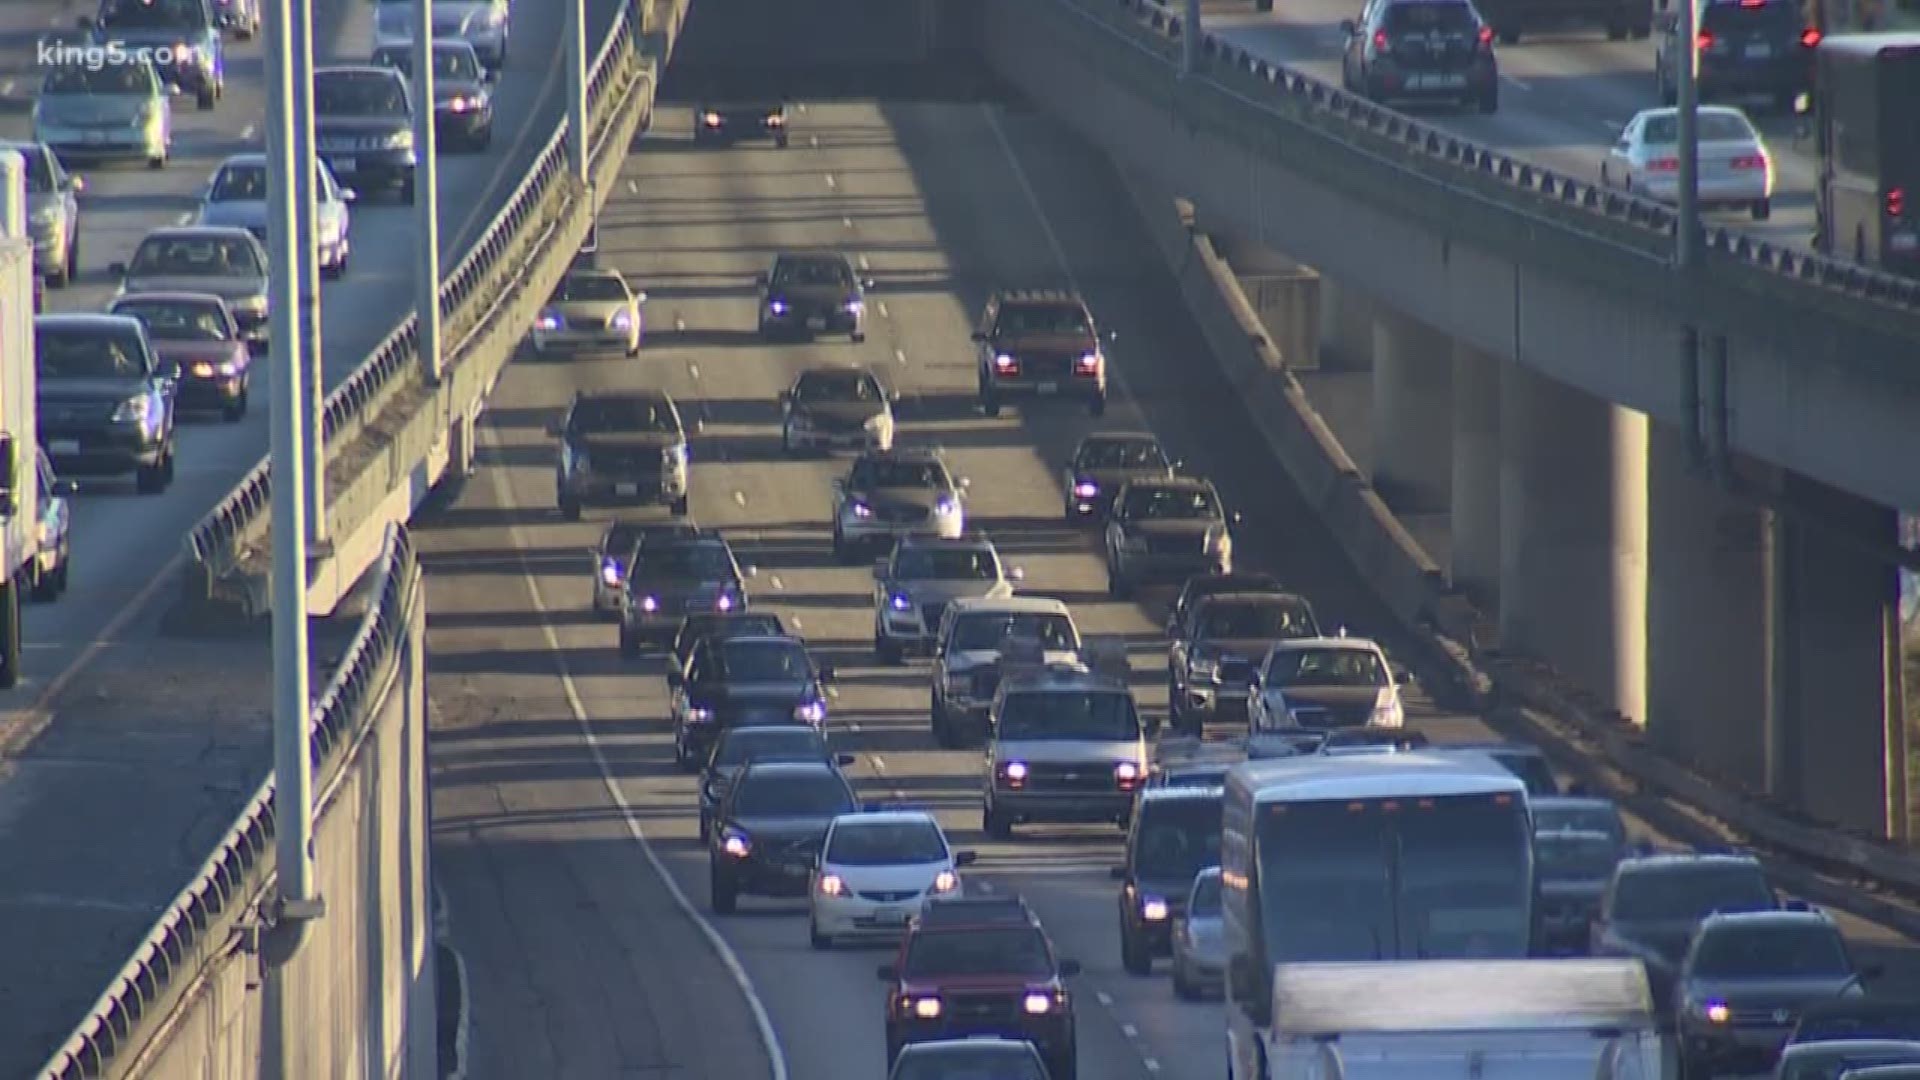 The average Seattle commuters waste 78 hours per year stuck in traffic, according to a new mobility study.